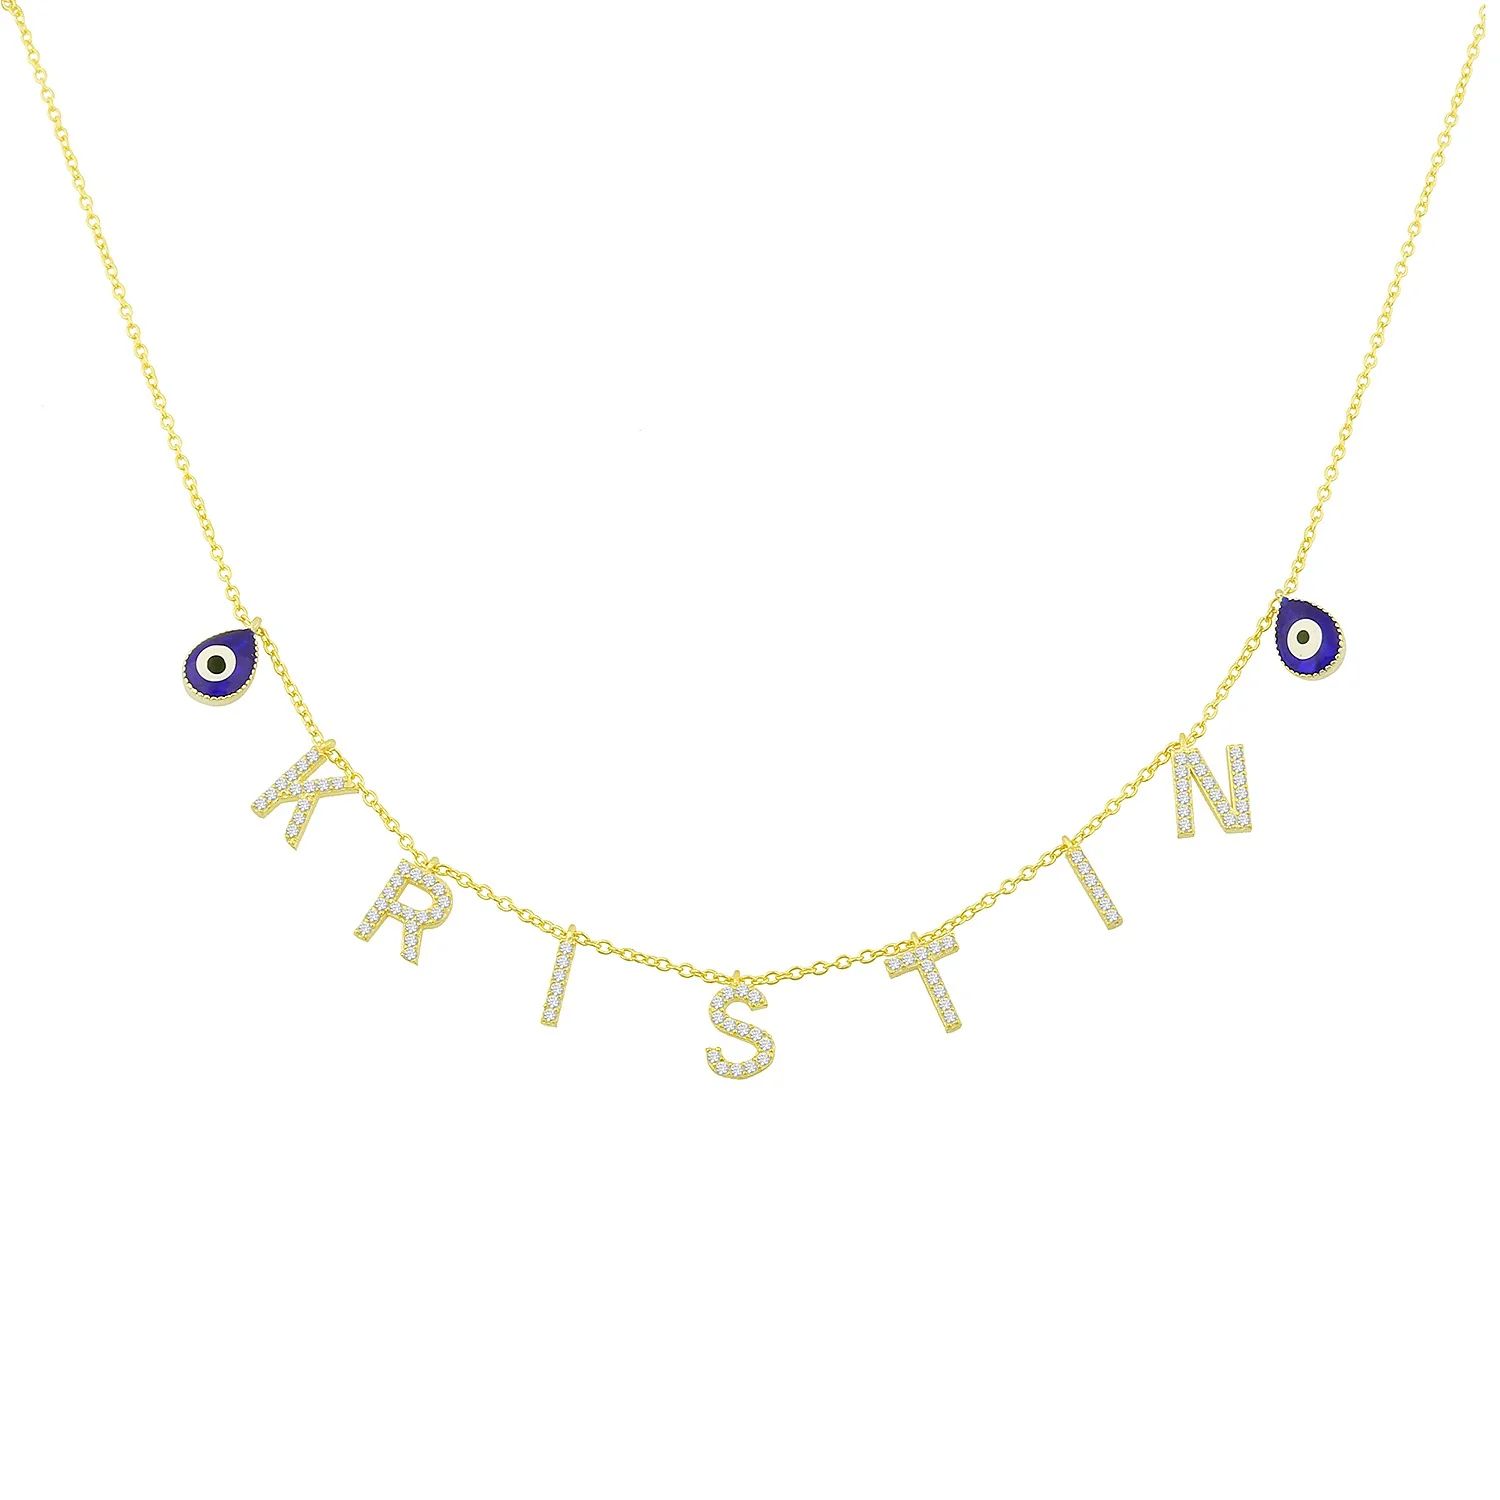 Lookout Personalized Necklace | Ragen Jewels